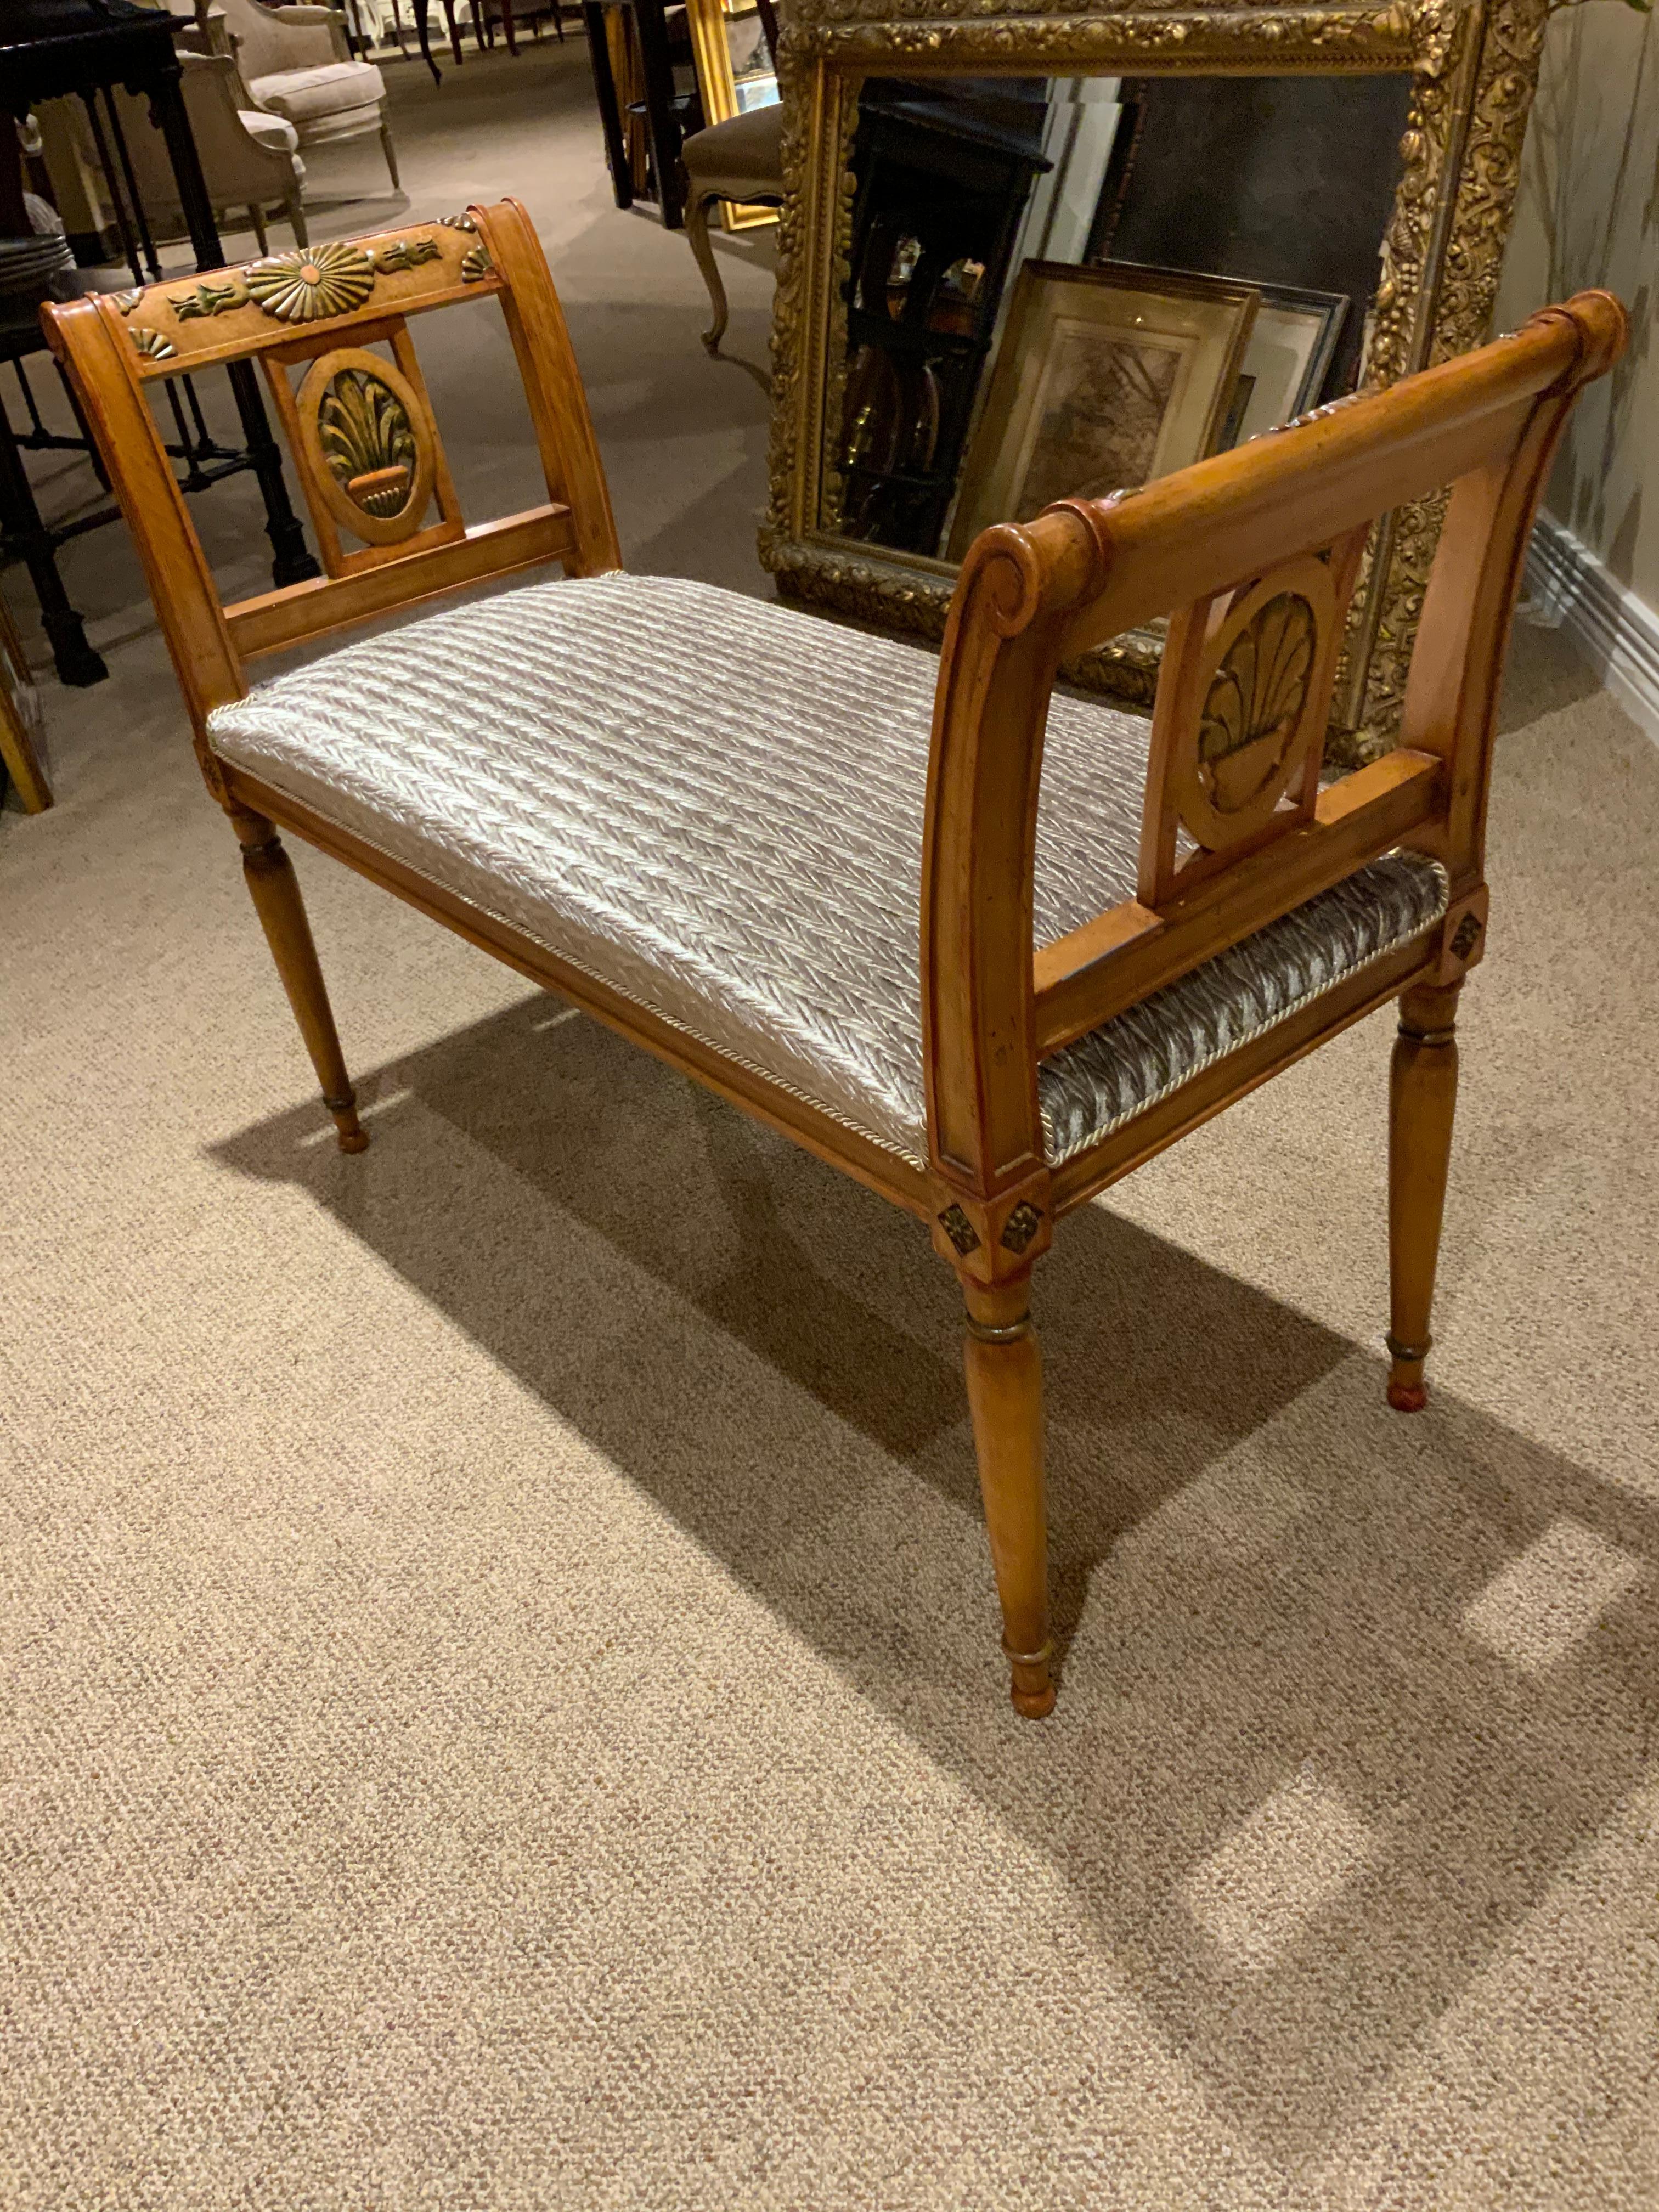 Hardwood Pair of Italian Style Benches in a Honey Color with Painted Embellishments